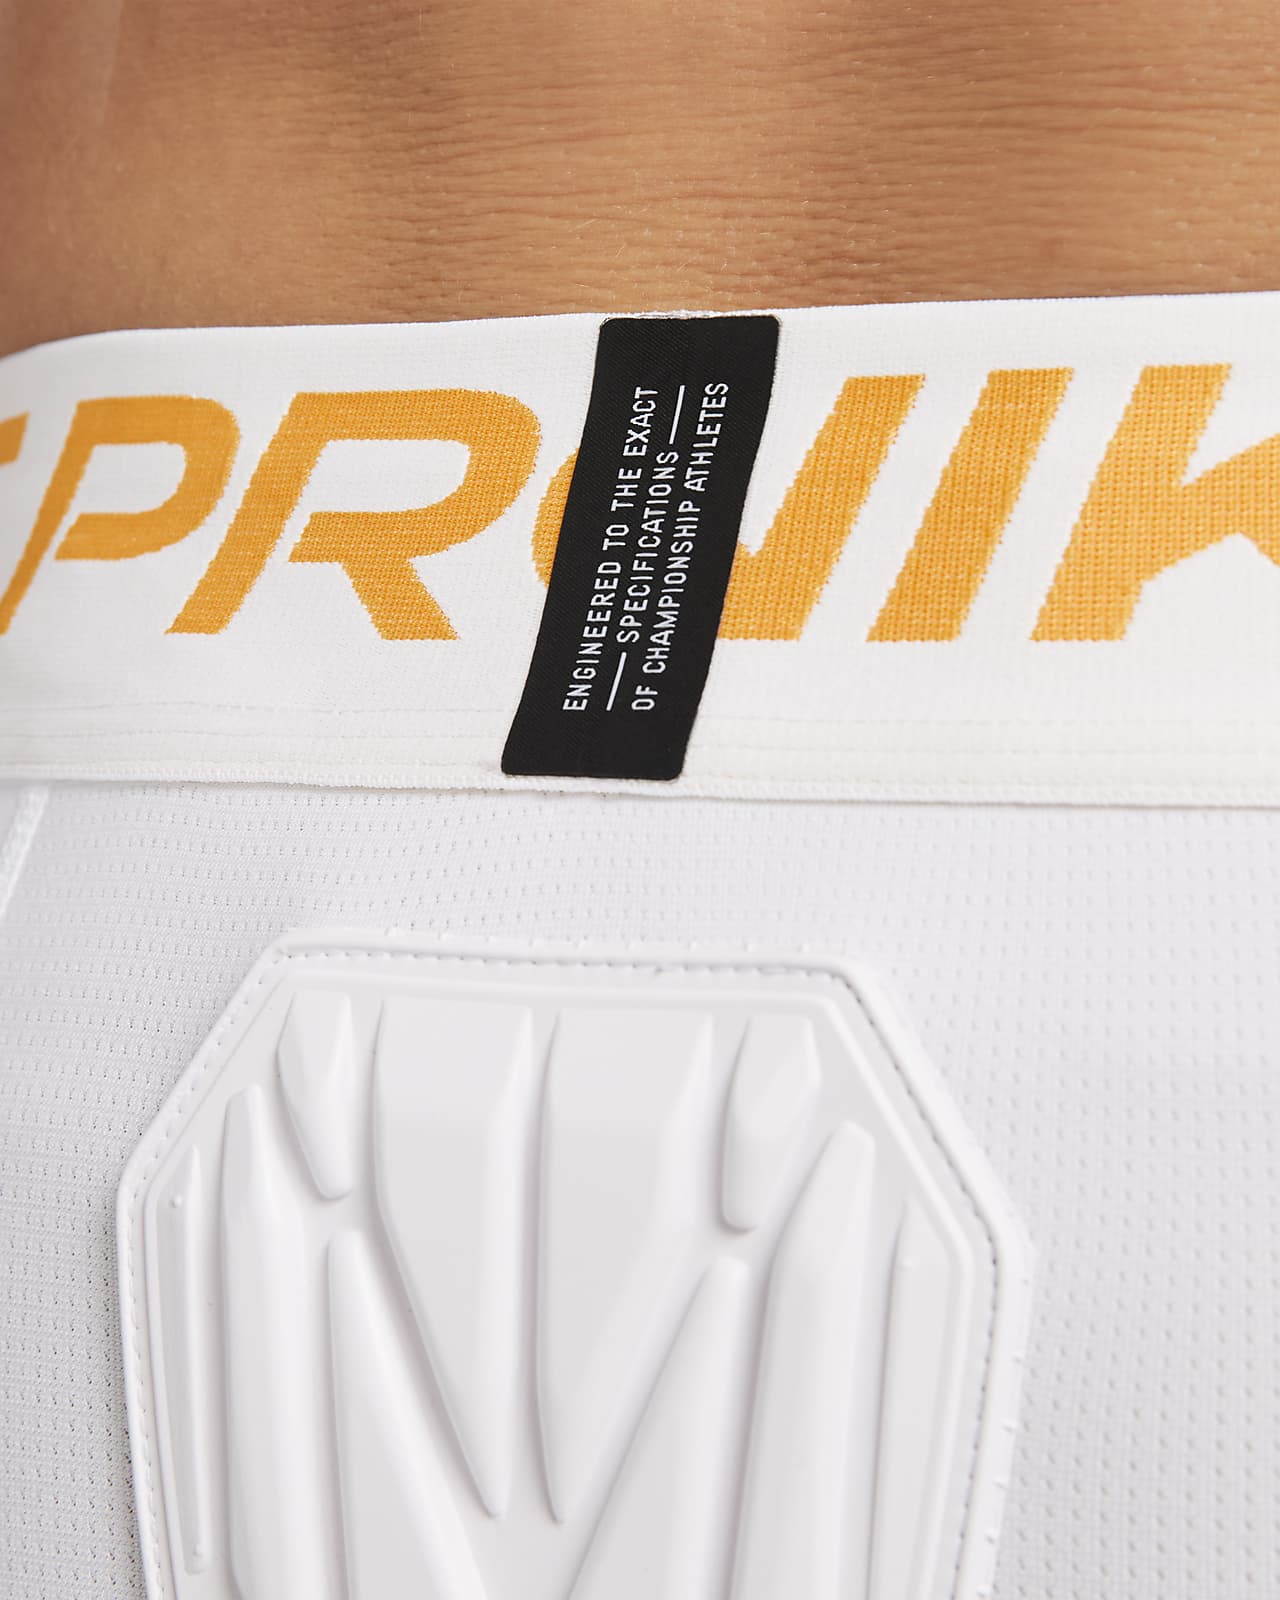 Nike Pro Hyperstrong Padded Compression Shorts Men's White/Gray New with  Tags 3XL - Locker Room Direct